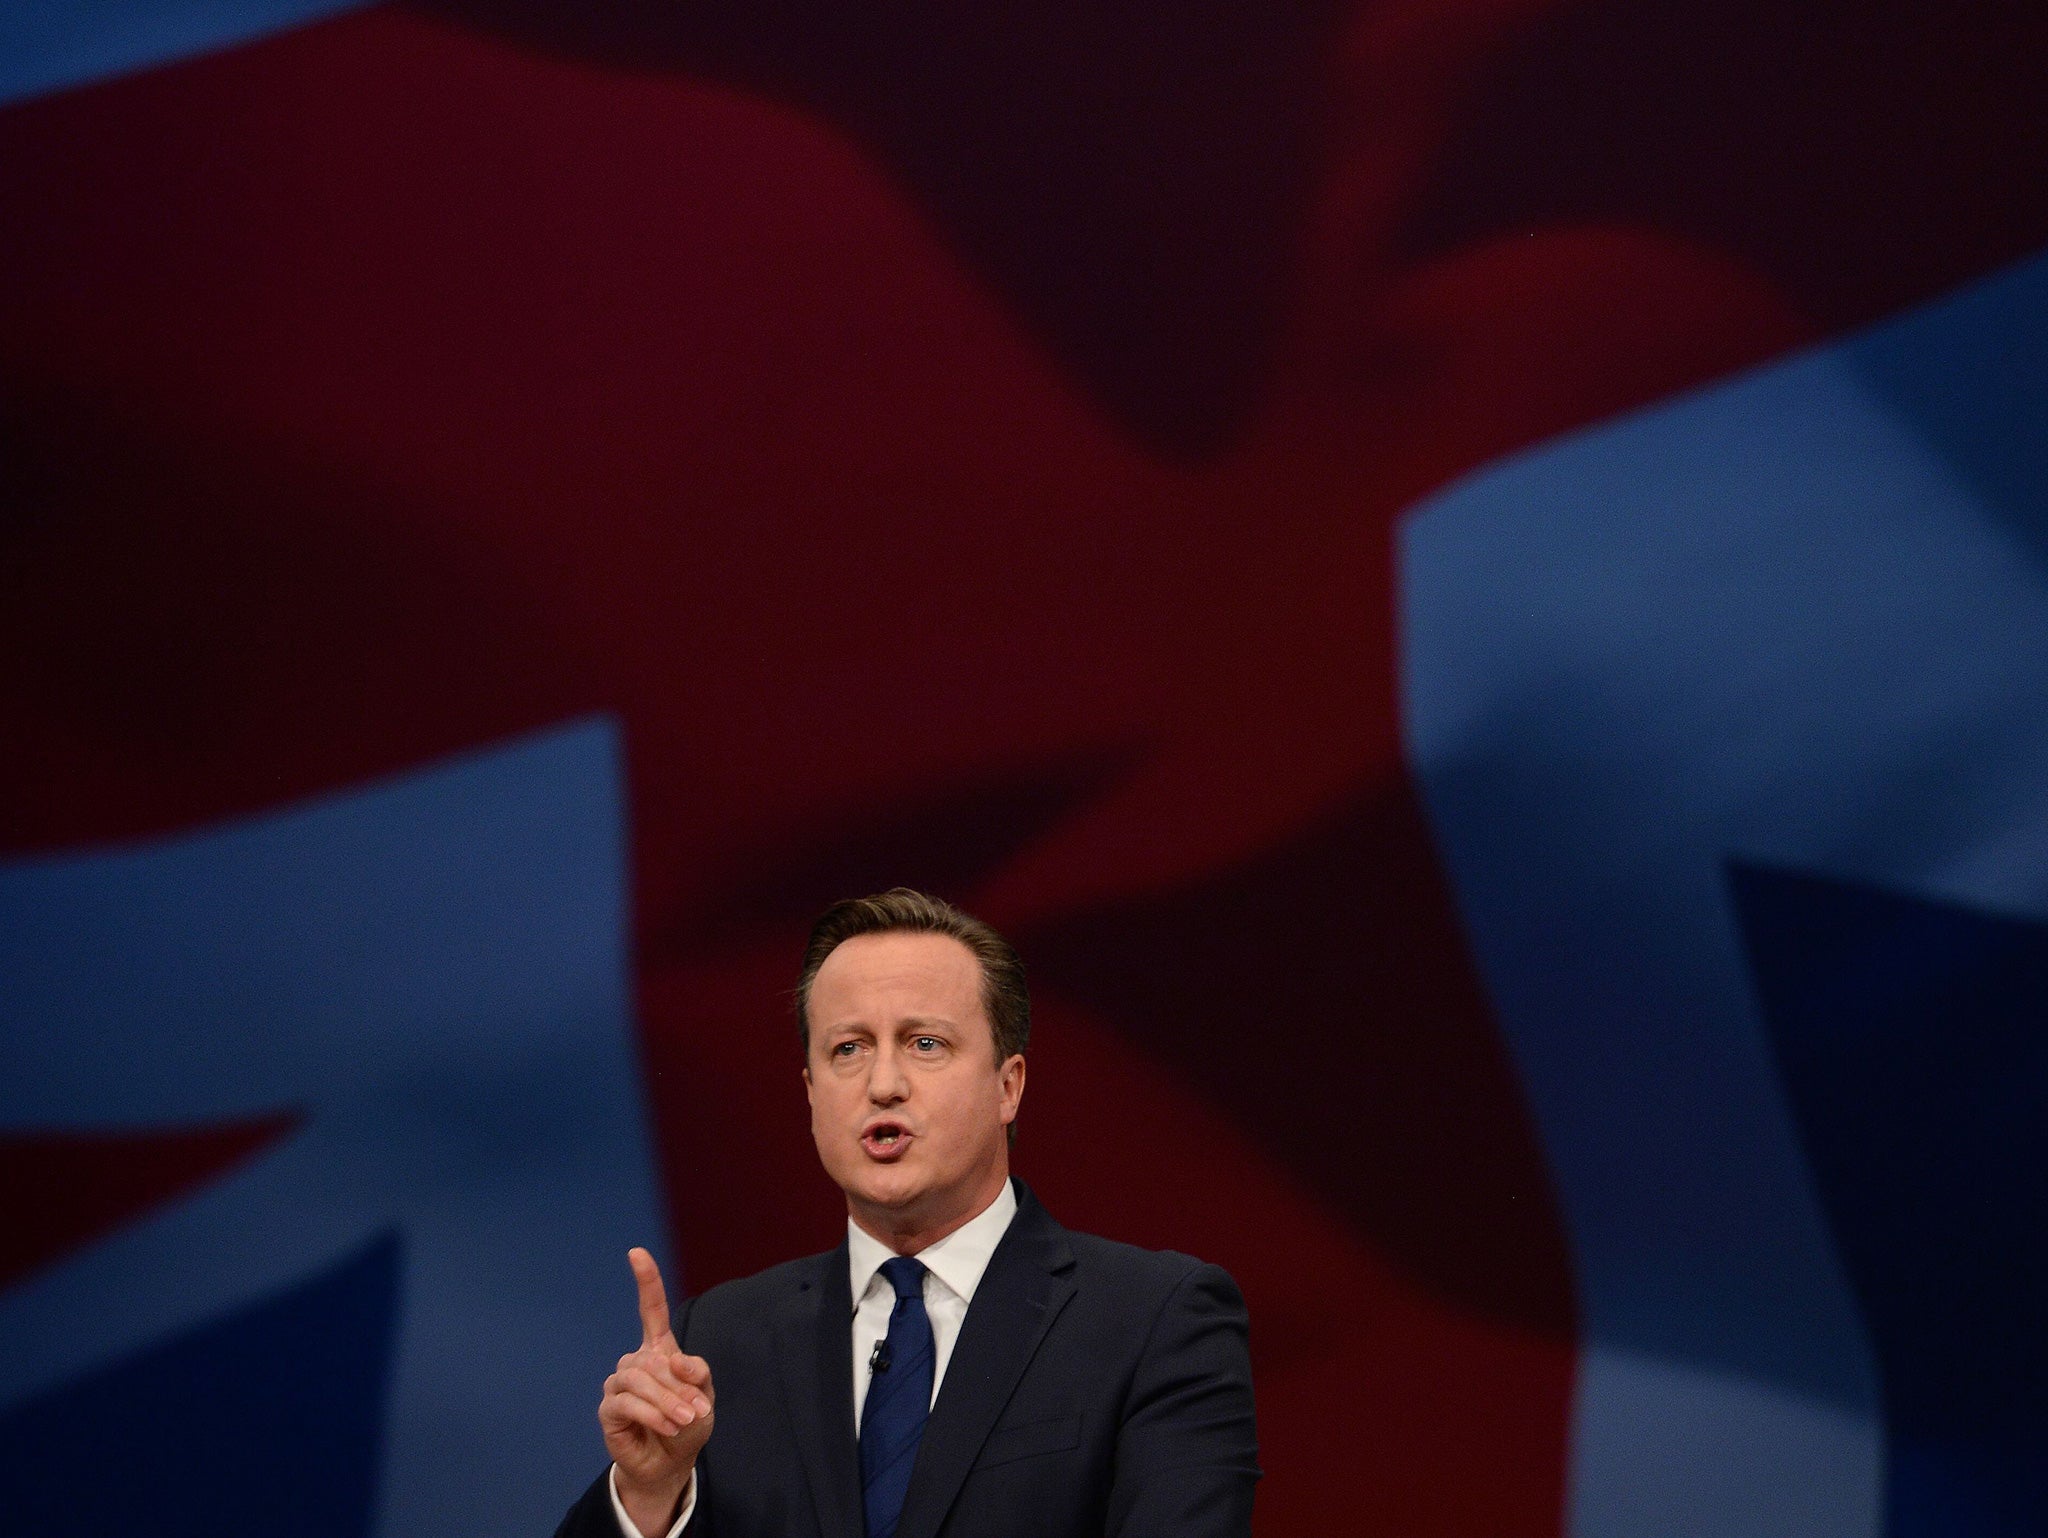 Prime Minister David Cameron addresses the Conservative Party conference at Manchester Central